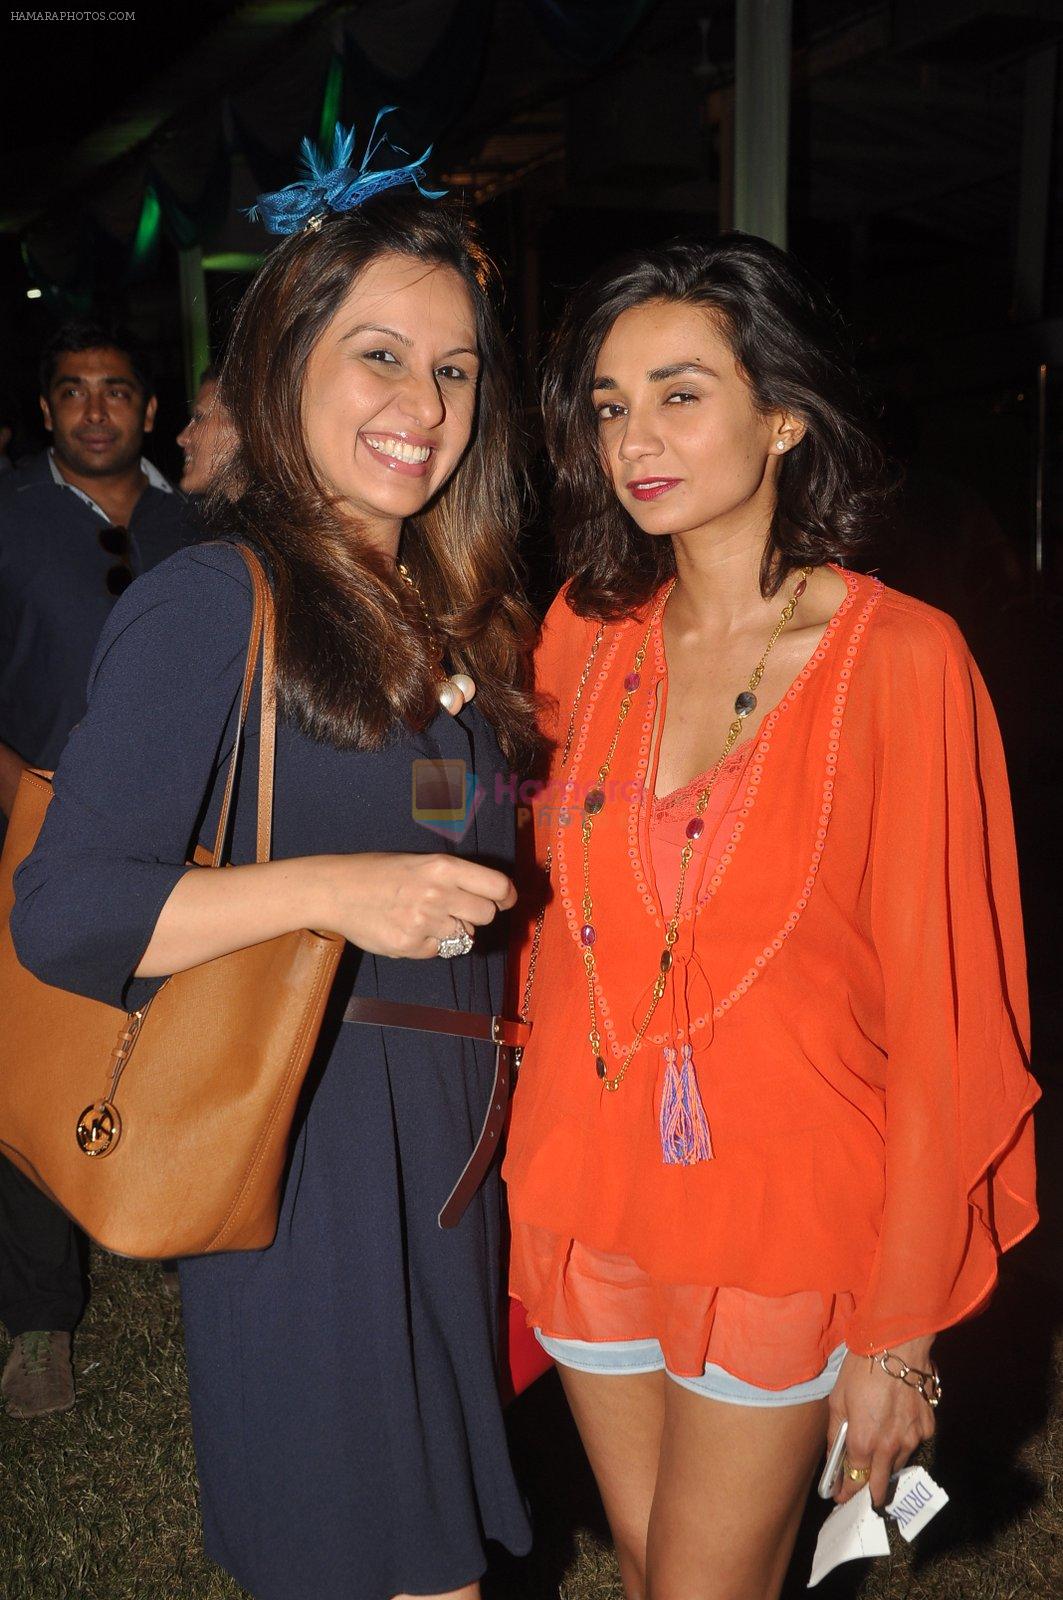 Ira Dubey at The ABV Nucleus Indian 2000 Guineas in Mumbai on 21st Dec 2014